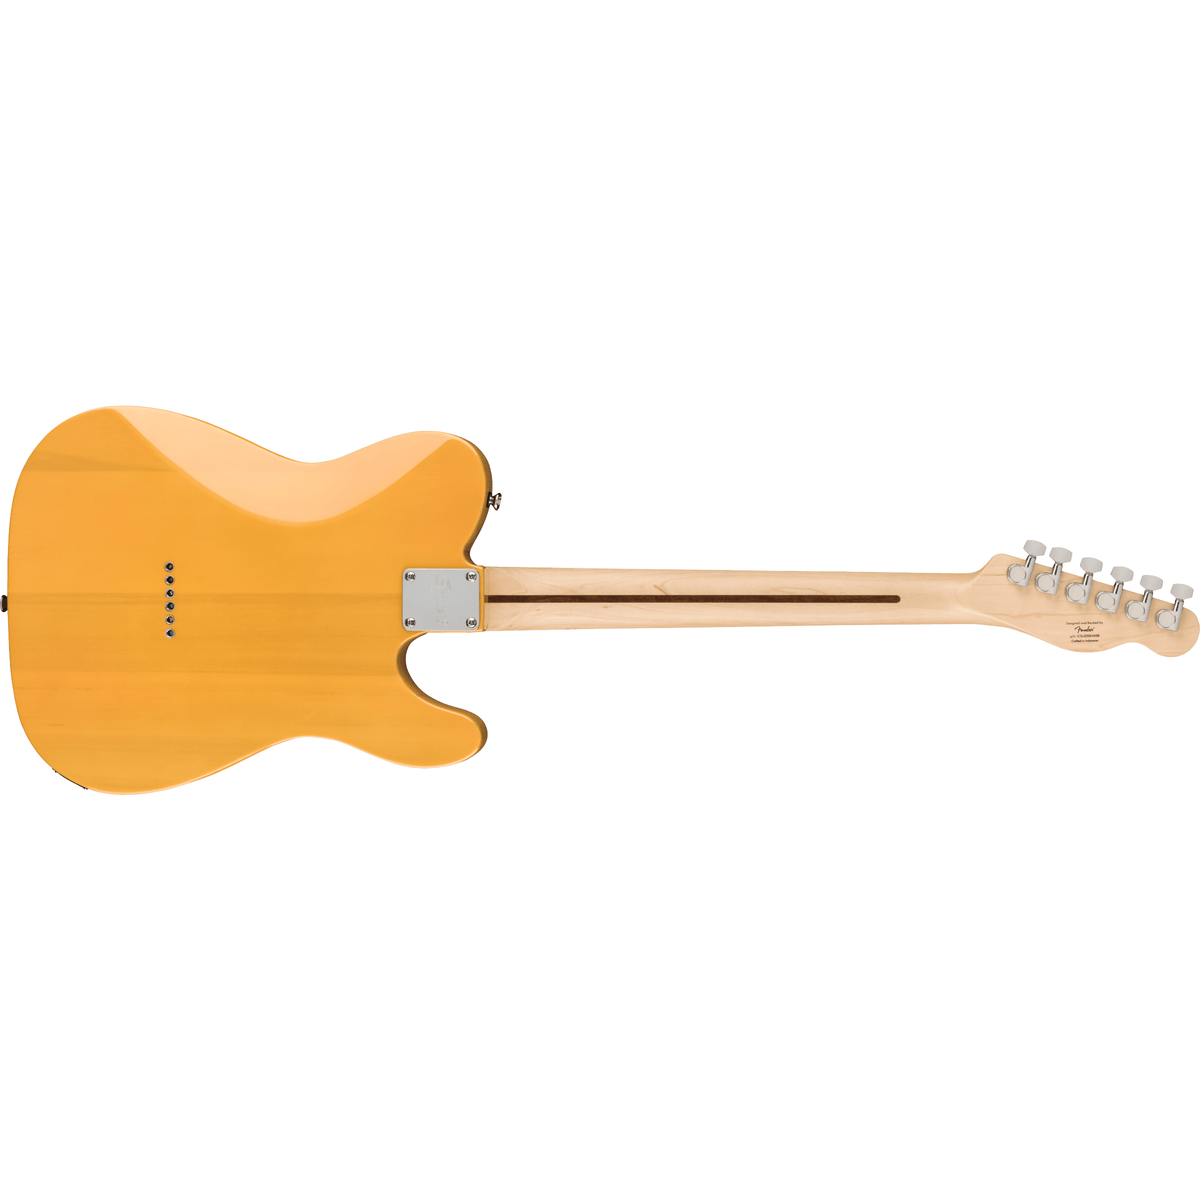 Squier Guitar Fender Squier Affinity Telecaster Left-Handed Butterscotch Blonde Electric Guitar - Byron Music